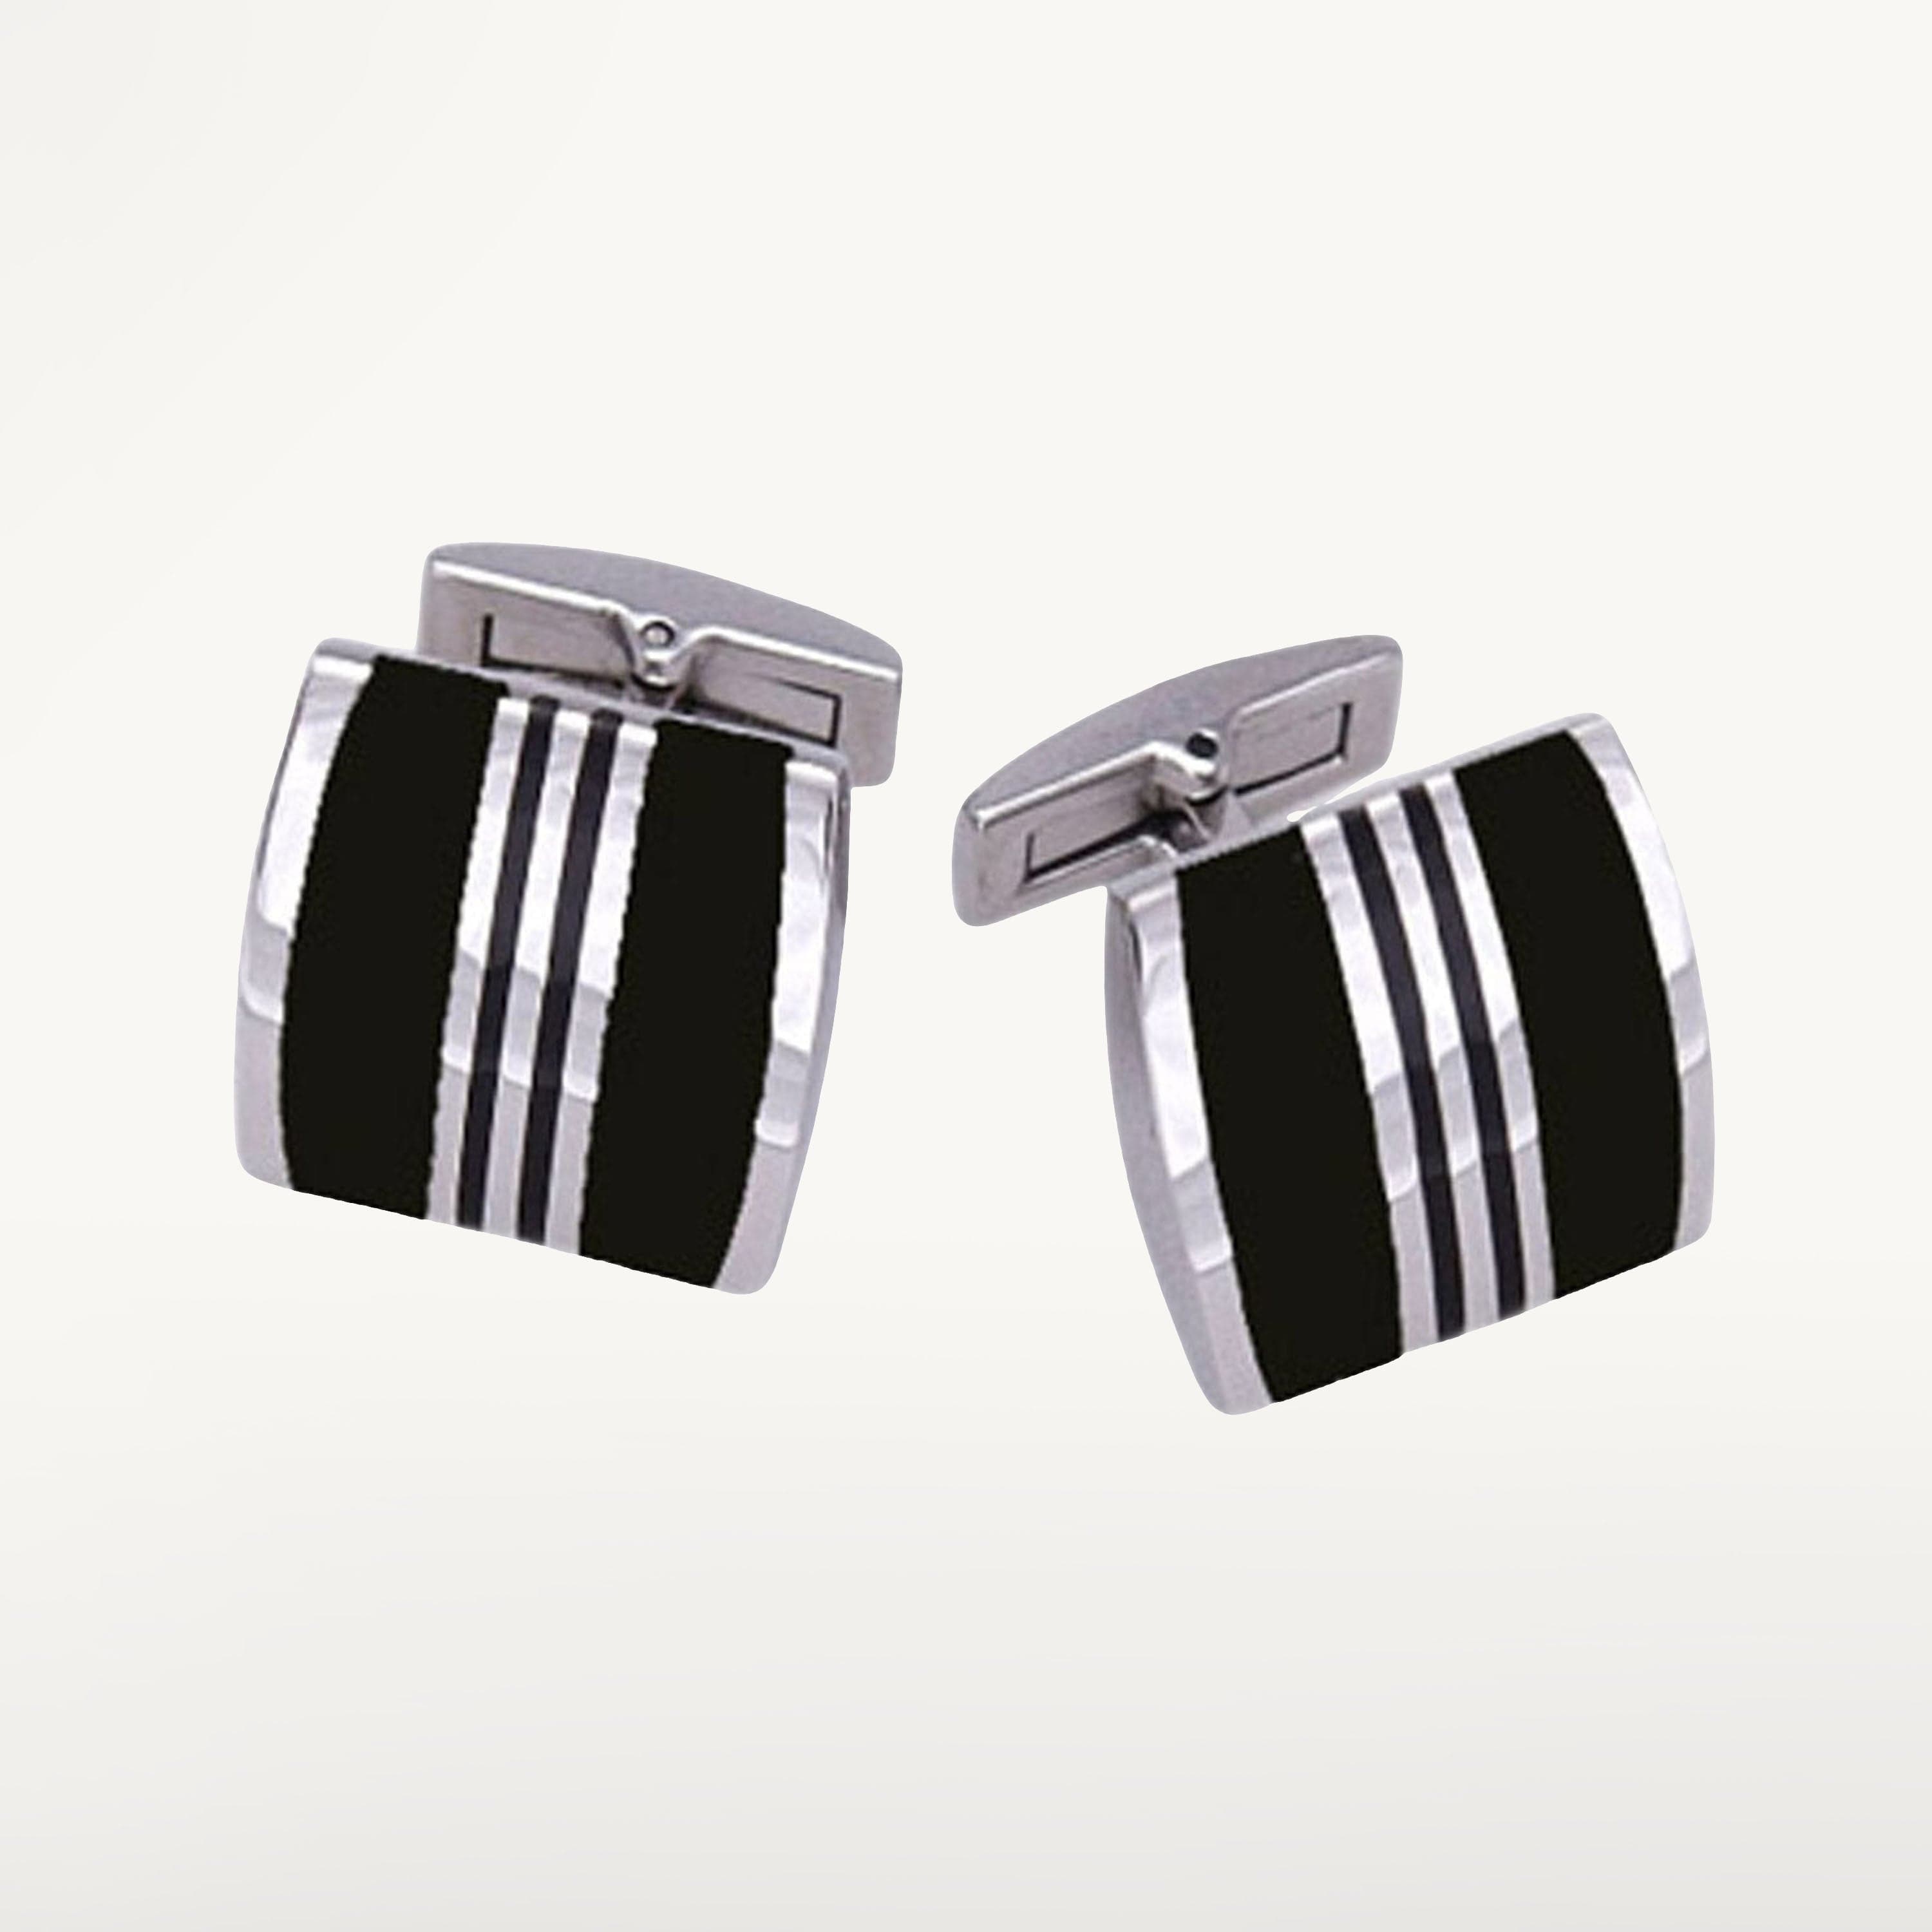 Kalifano Cufflinks CL-71 - Stainless Steel Cuff Links - Fancy Double Line with Black CL-71